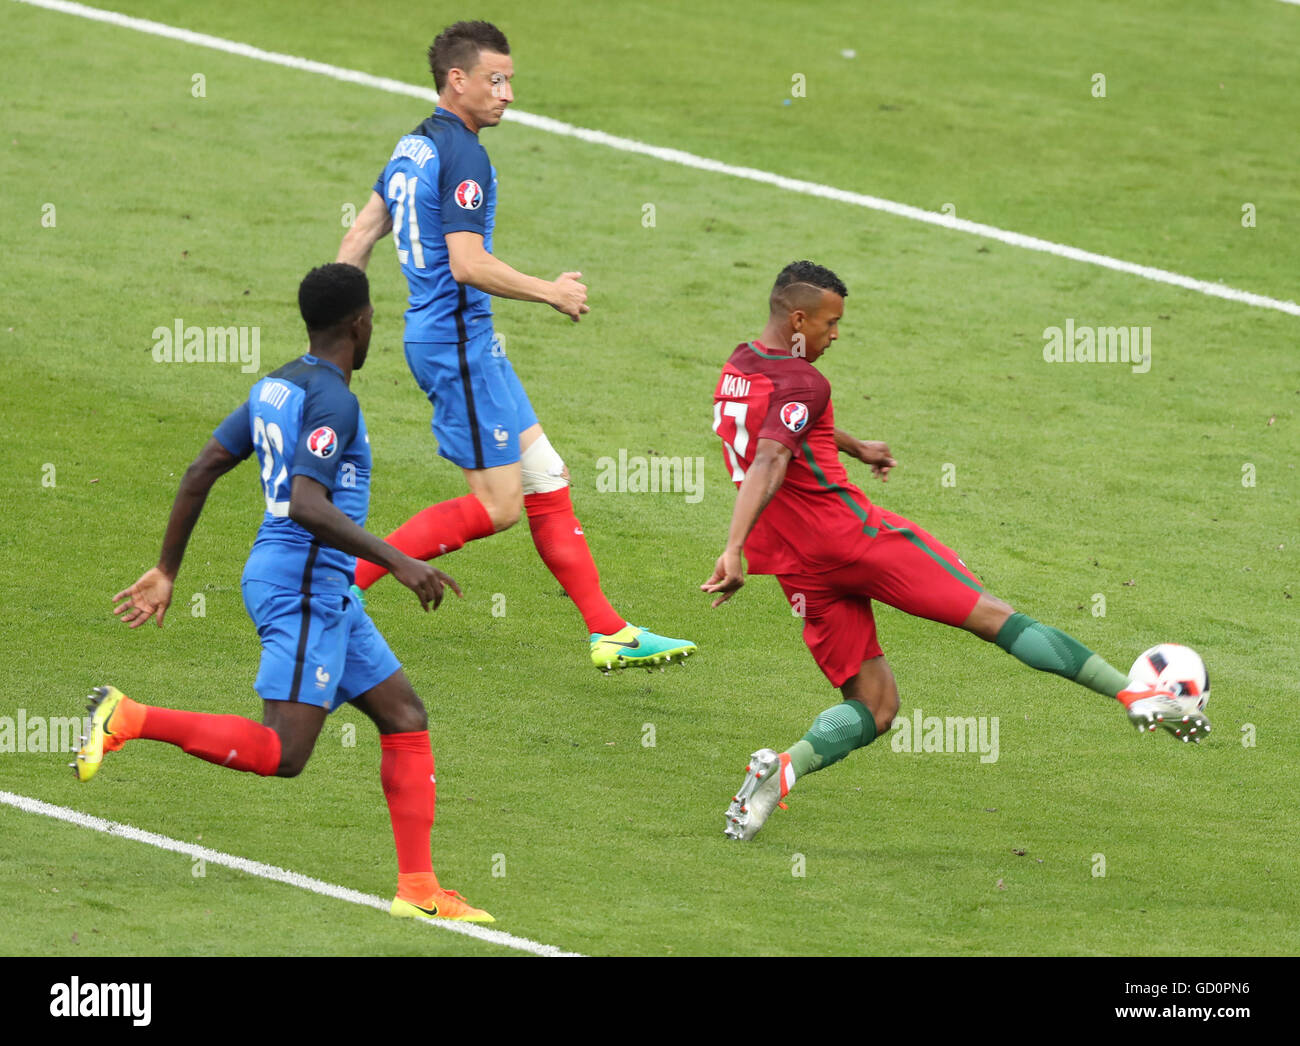 Paris, France. 10th July, 2016. Nani (R) of Portugal competes during the Euro 2016 final football match between Portugal and France in Paris, France, July 10, 2016. © Bai Xuefei/Xinhua/Alamy Live News Stock Photo